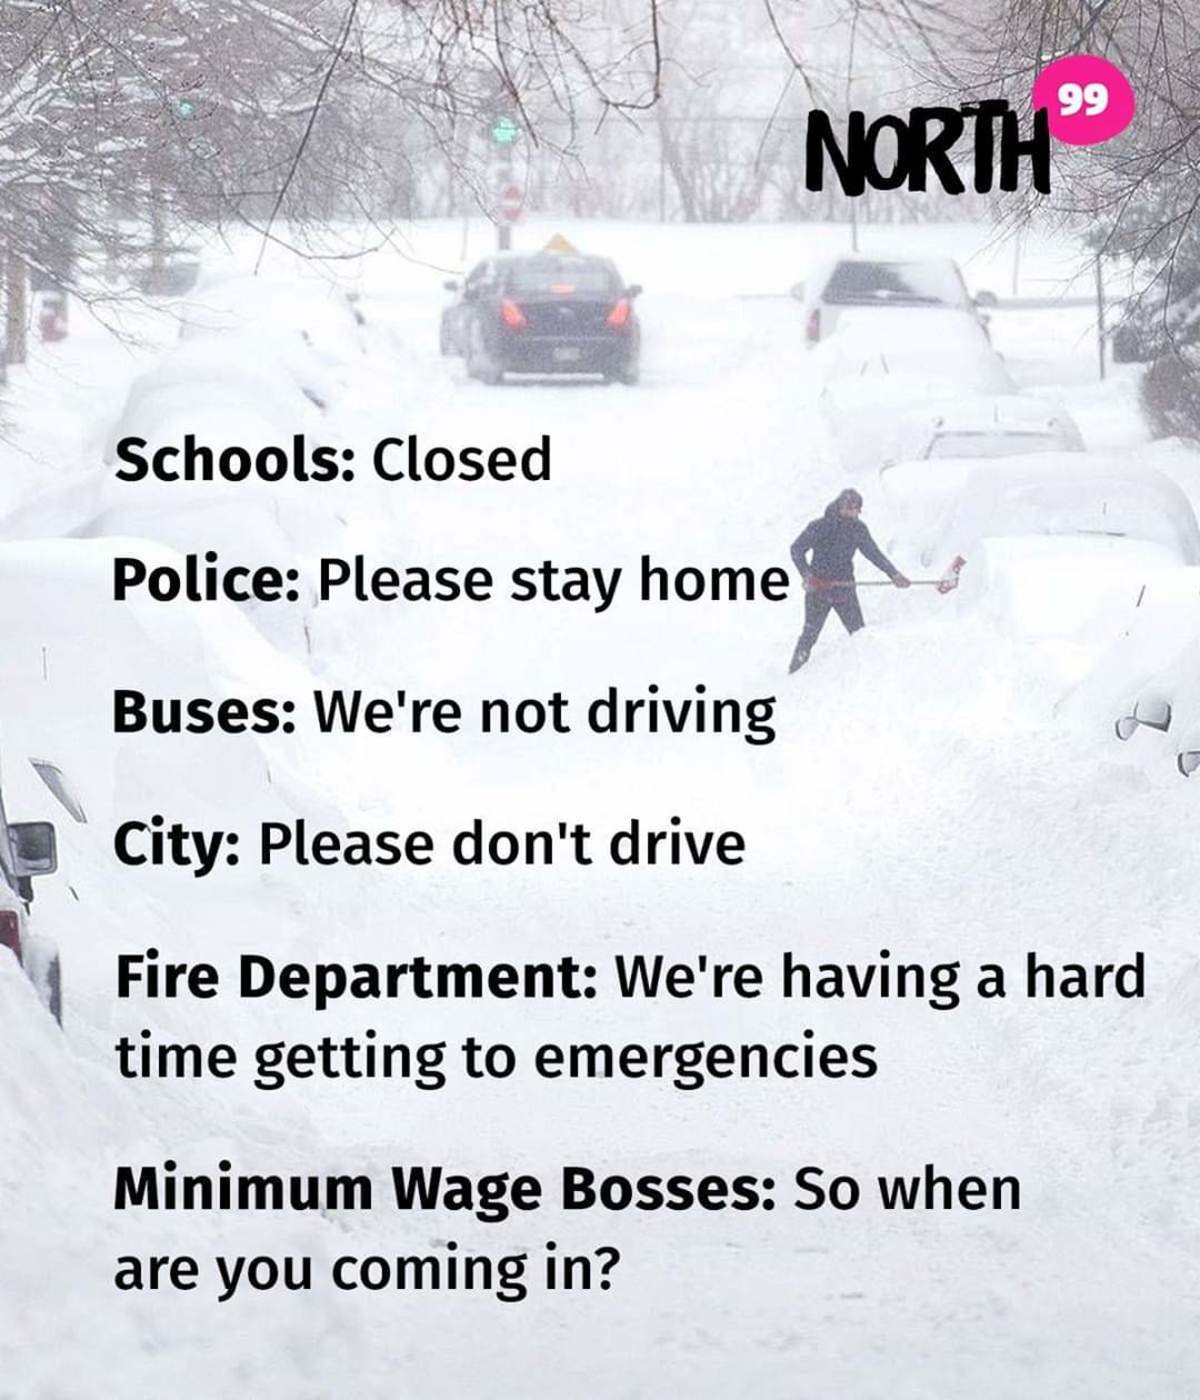 snow - 99 North Schools Closed Police Please stay home Buses We're not driving City Please don't drive Fire Department We're having a hard time getting to emergencies Minimum Wage Bosses So when are you coming in?